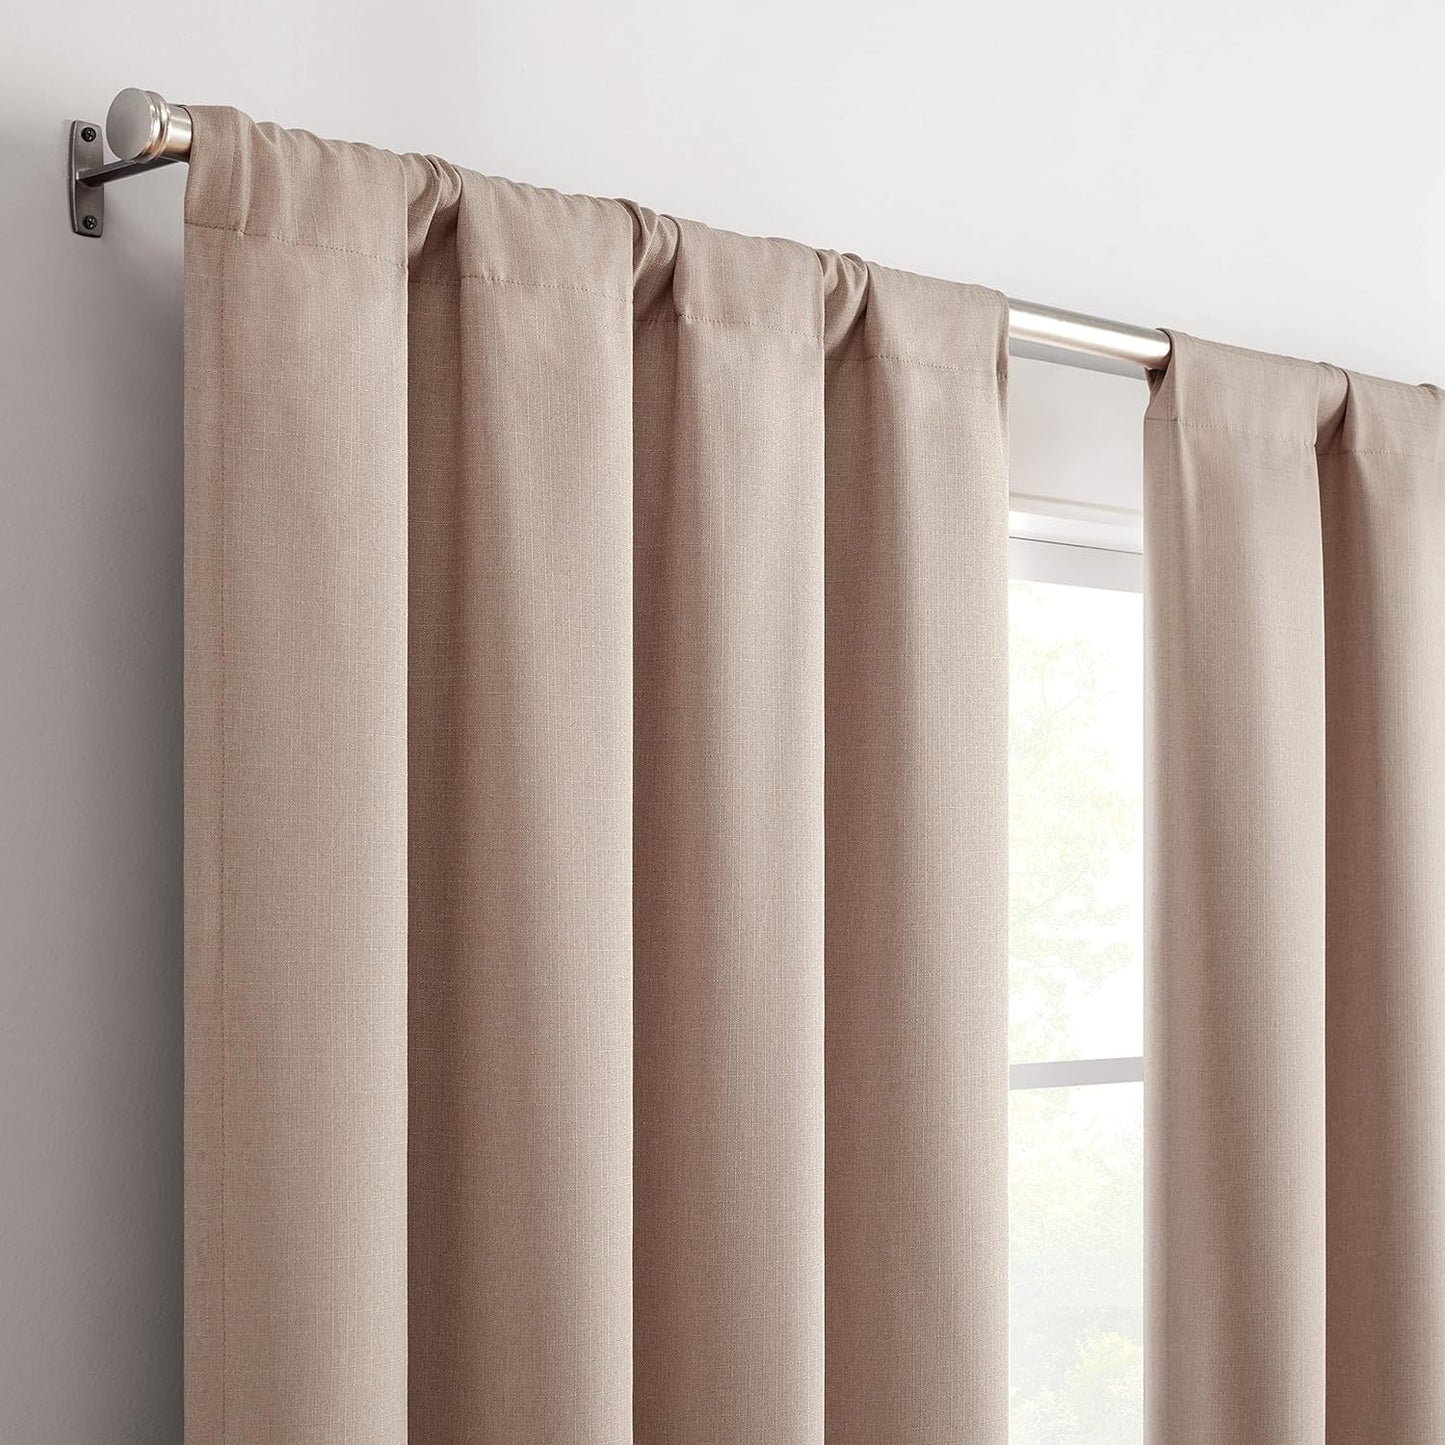 Eclipse Cannes Magnitech 100% Blackout Curtain, Rod Pocket Window Curtain Panel, Seamless Magnetic Closure for Bedroom, Living Room or Nursery, 63 in Long X 40 in Wide, (1 Panel), Natural/ Linen  KEECO   